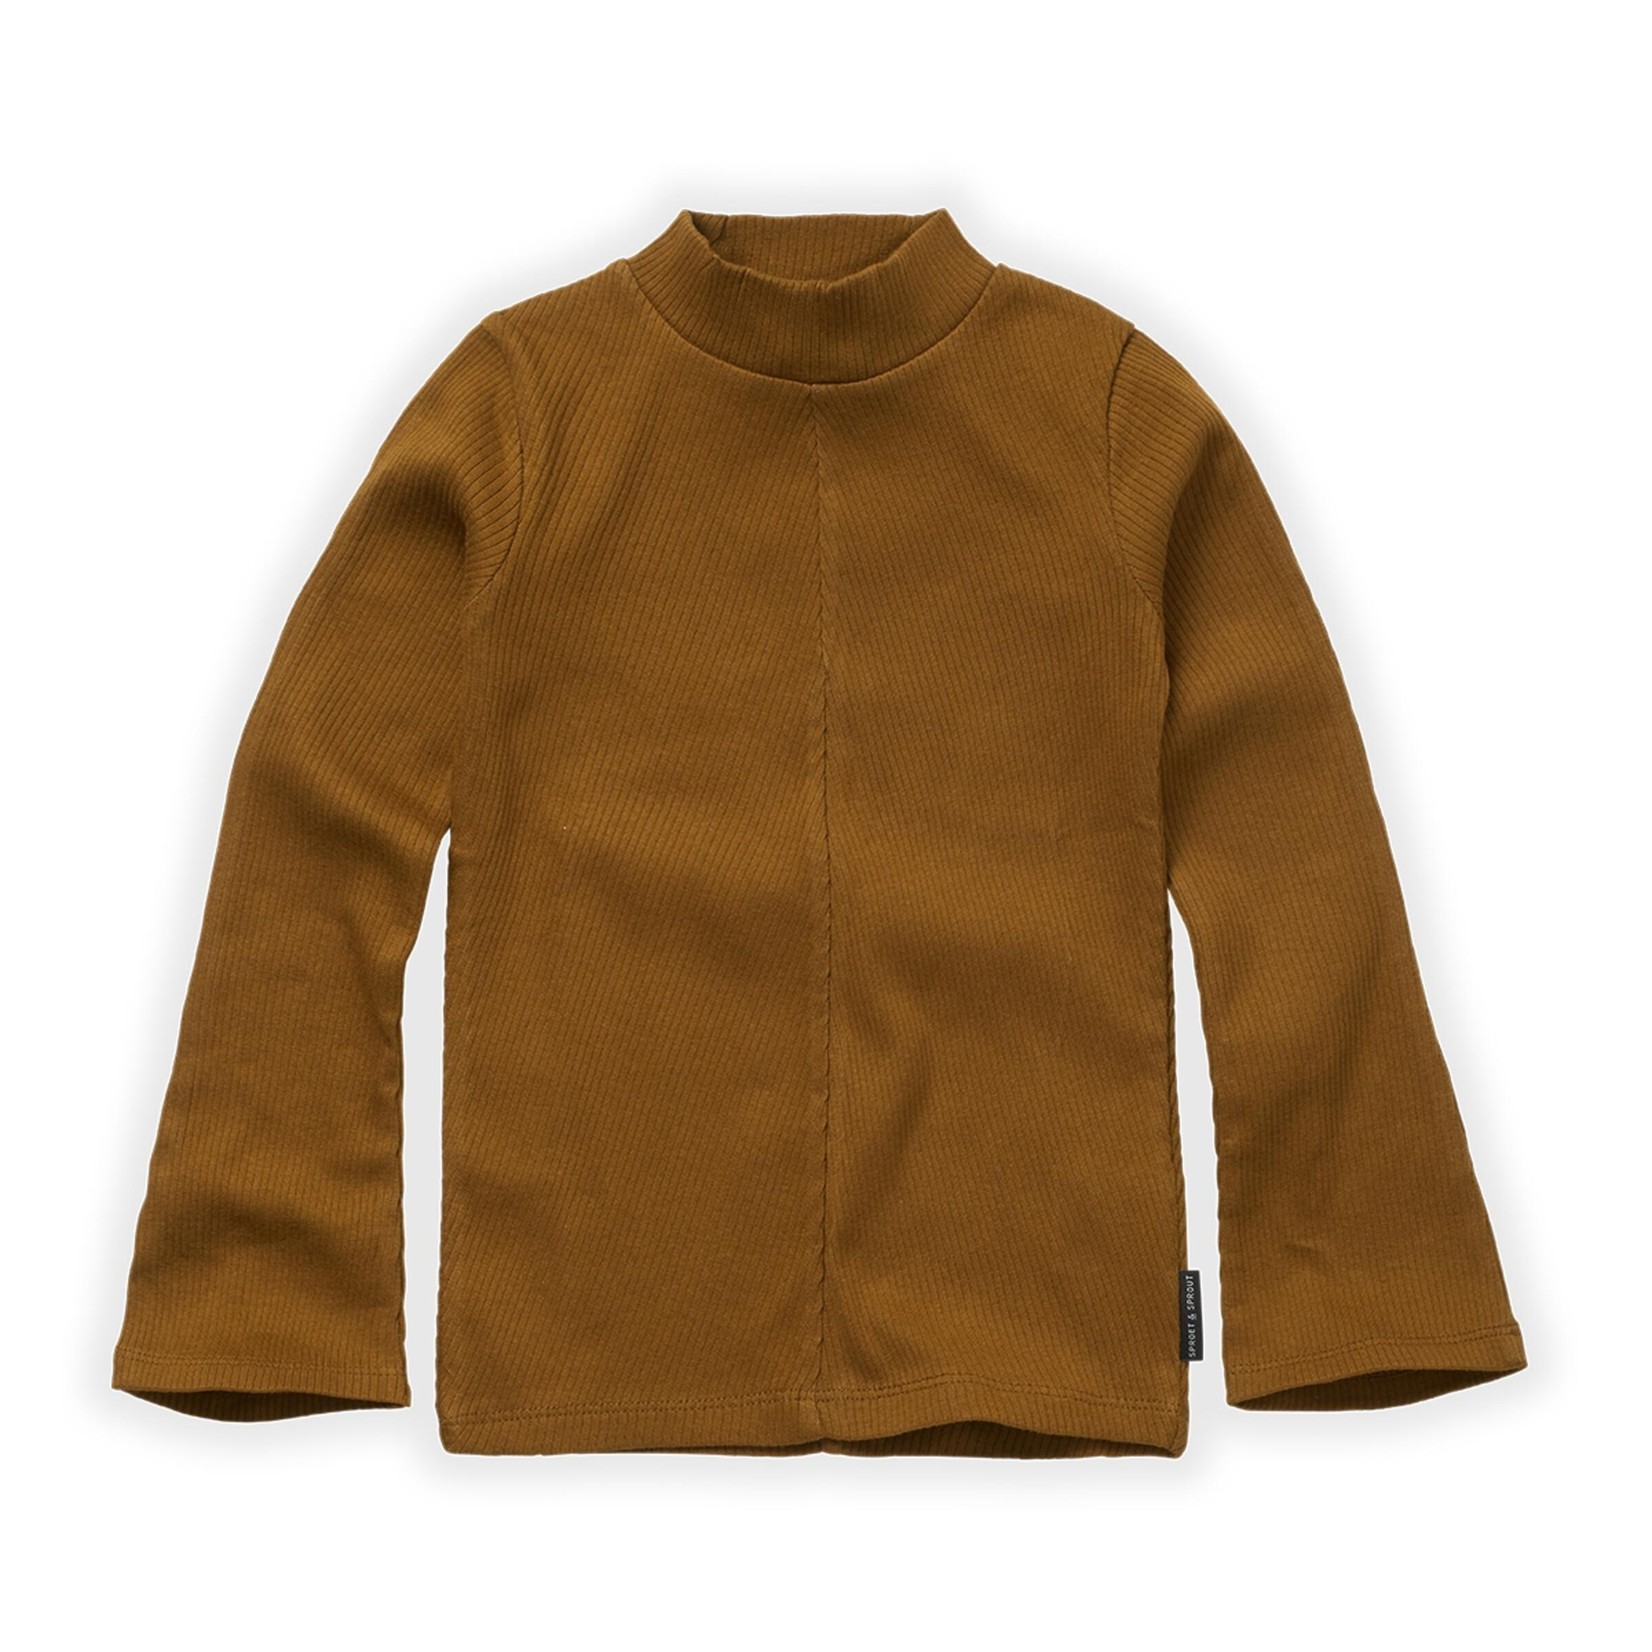 Sproet & Sprout S&S - Turtleneck rib - Toffee